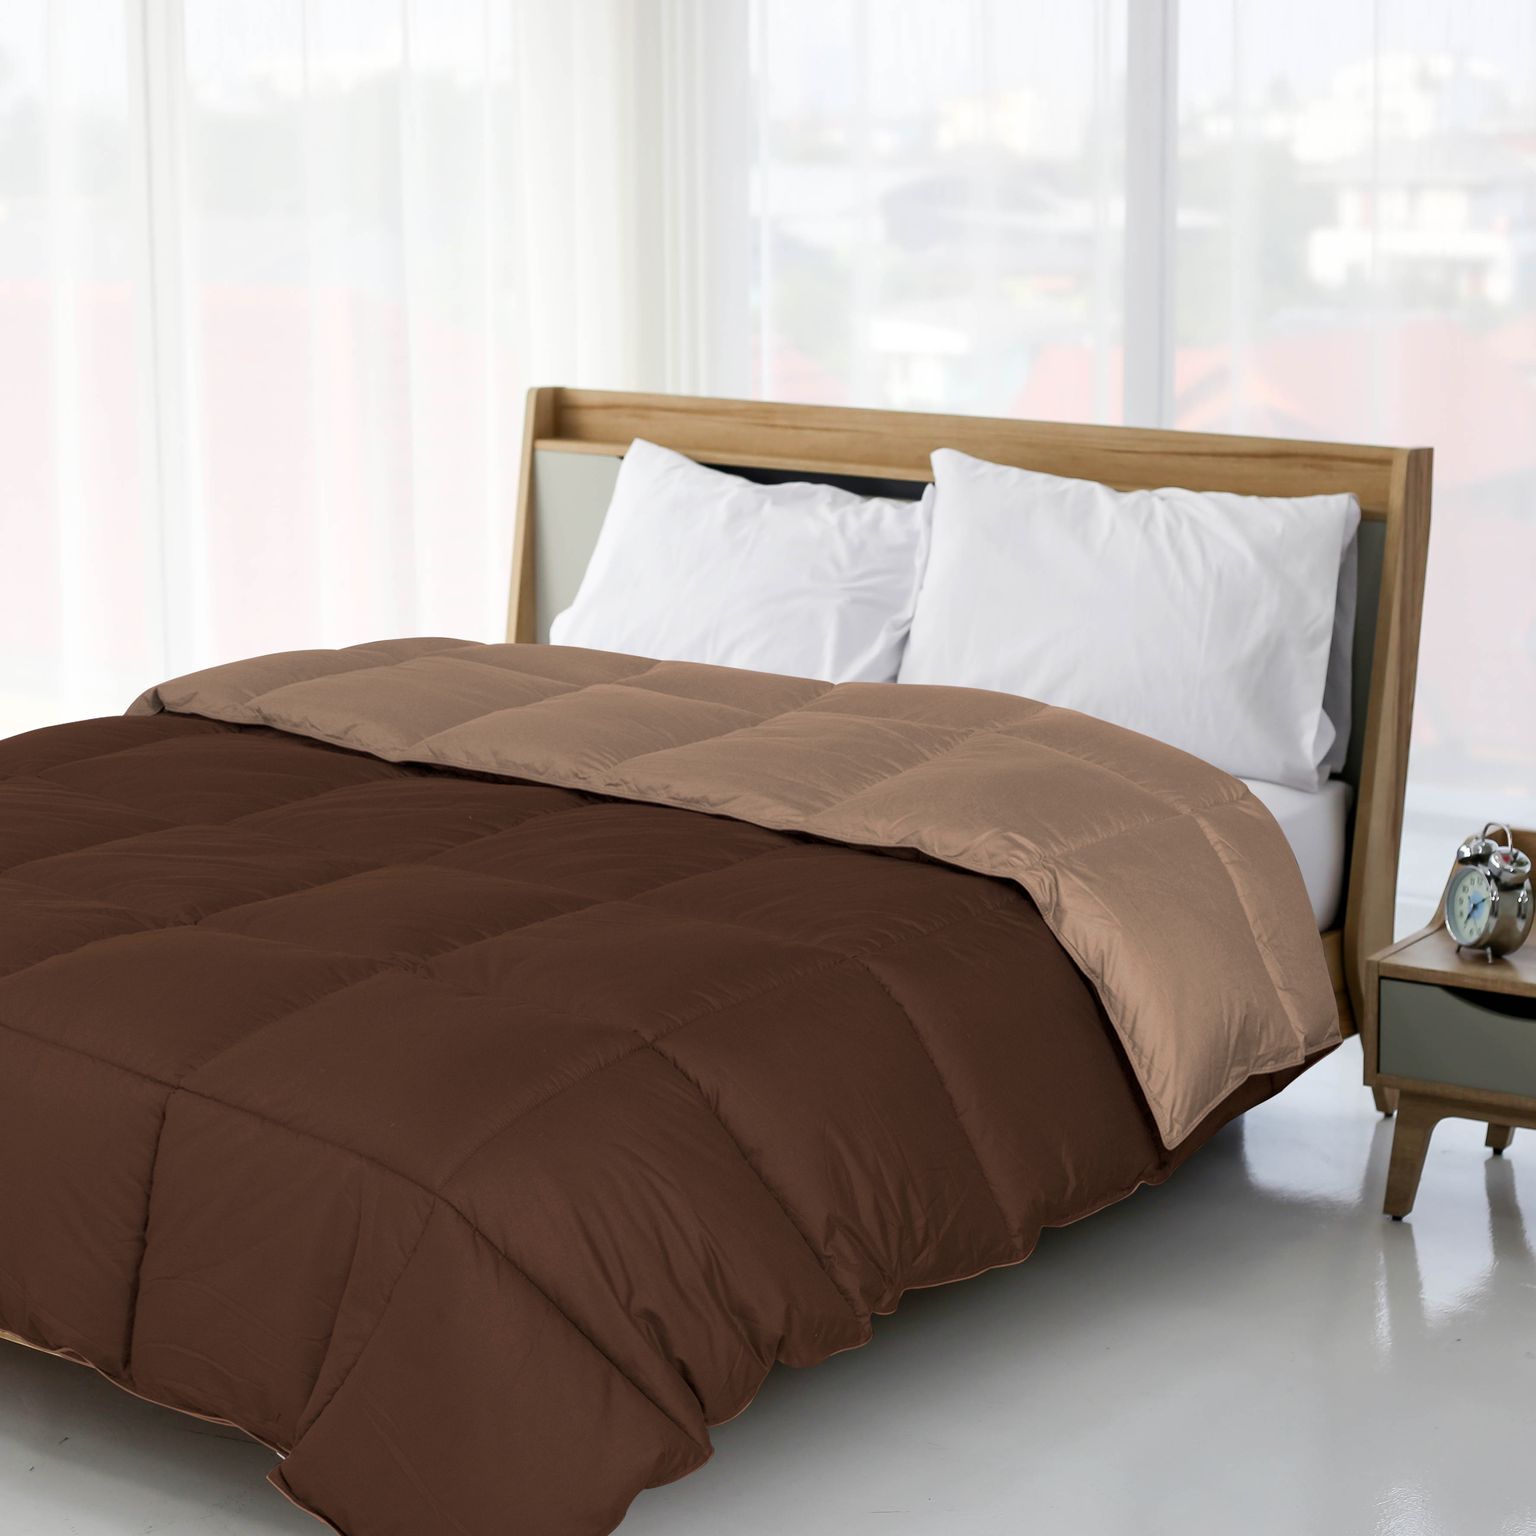 Superior Down Alternative Reversible Comforter, King, Taupe/ Choco - image 2 of 3